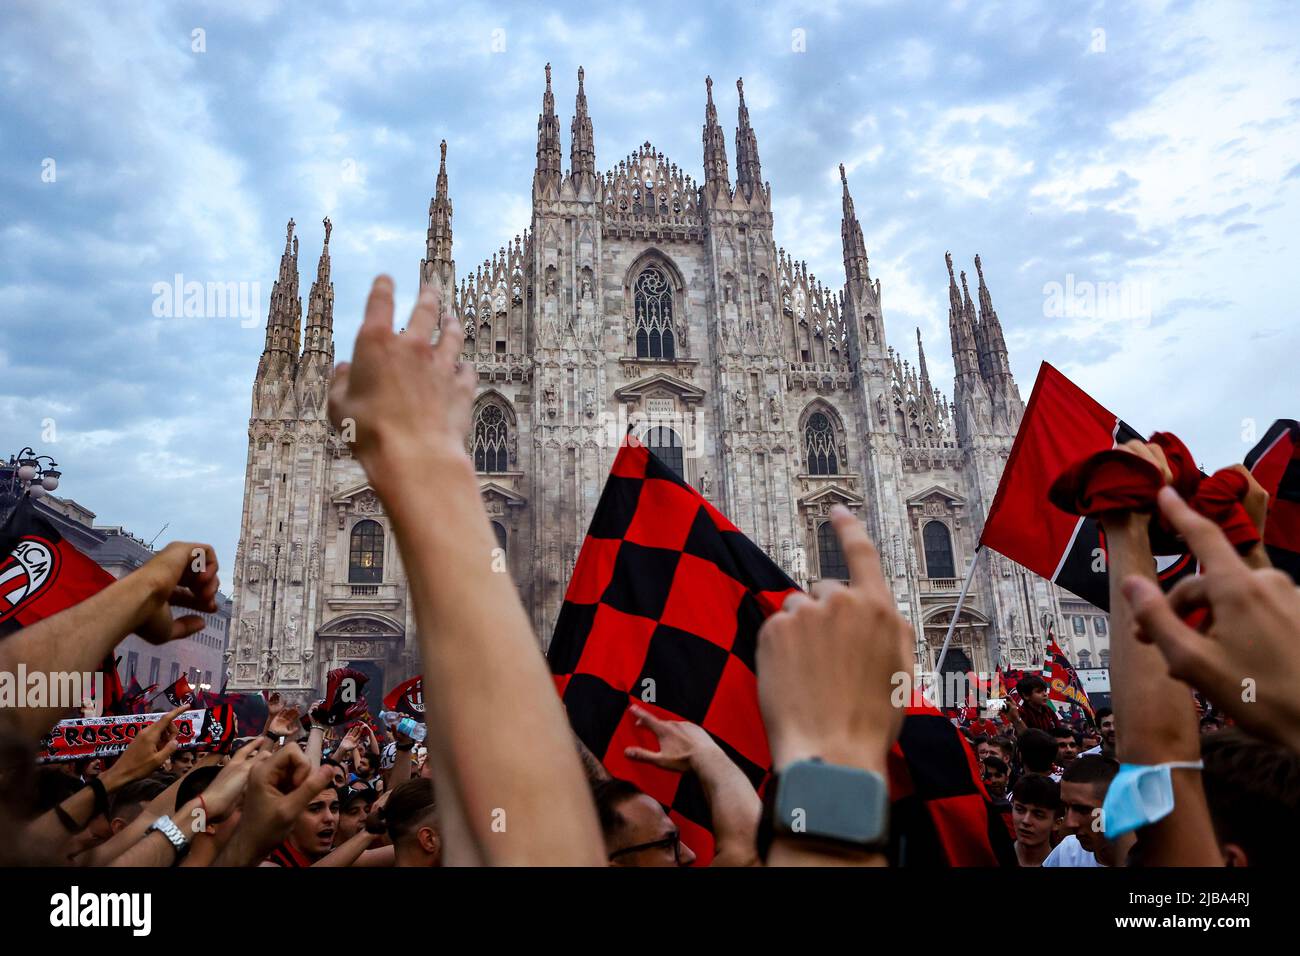 Milan fans celebrate in Piazza Duomo after winning Serie A and the Scudetto in Milano, Italy, on May 22 2022 Stock Photo